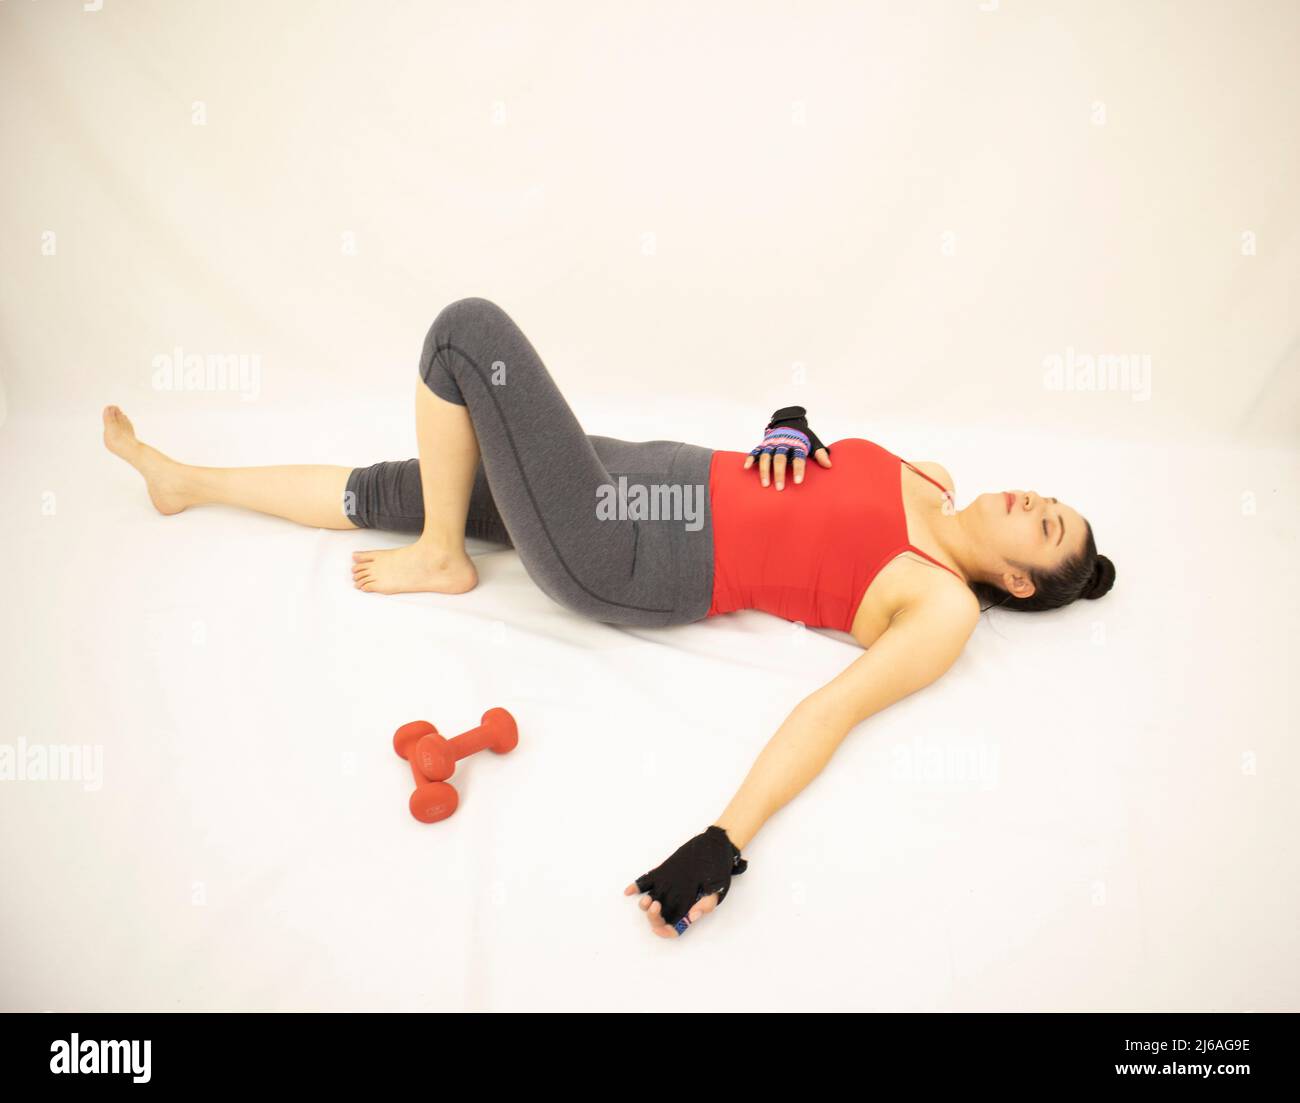 Fit Young Lady Lying on Mat with Roll on Breast during Workout Stock Image  - Image of brunette, fitness: 253445325